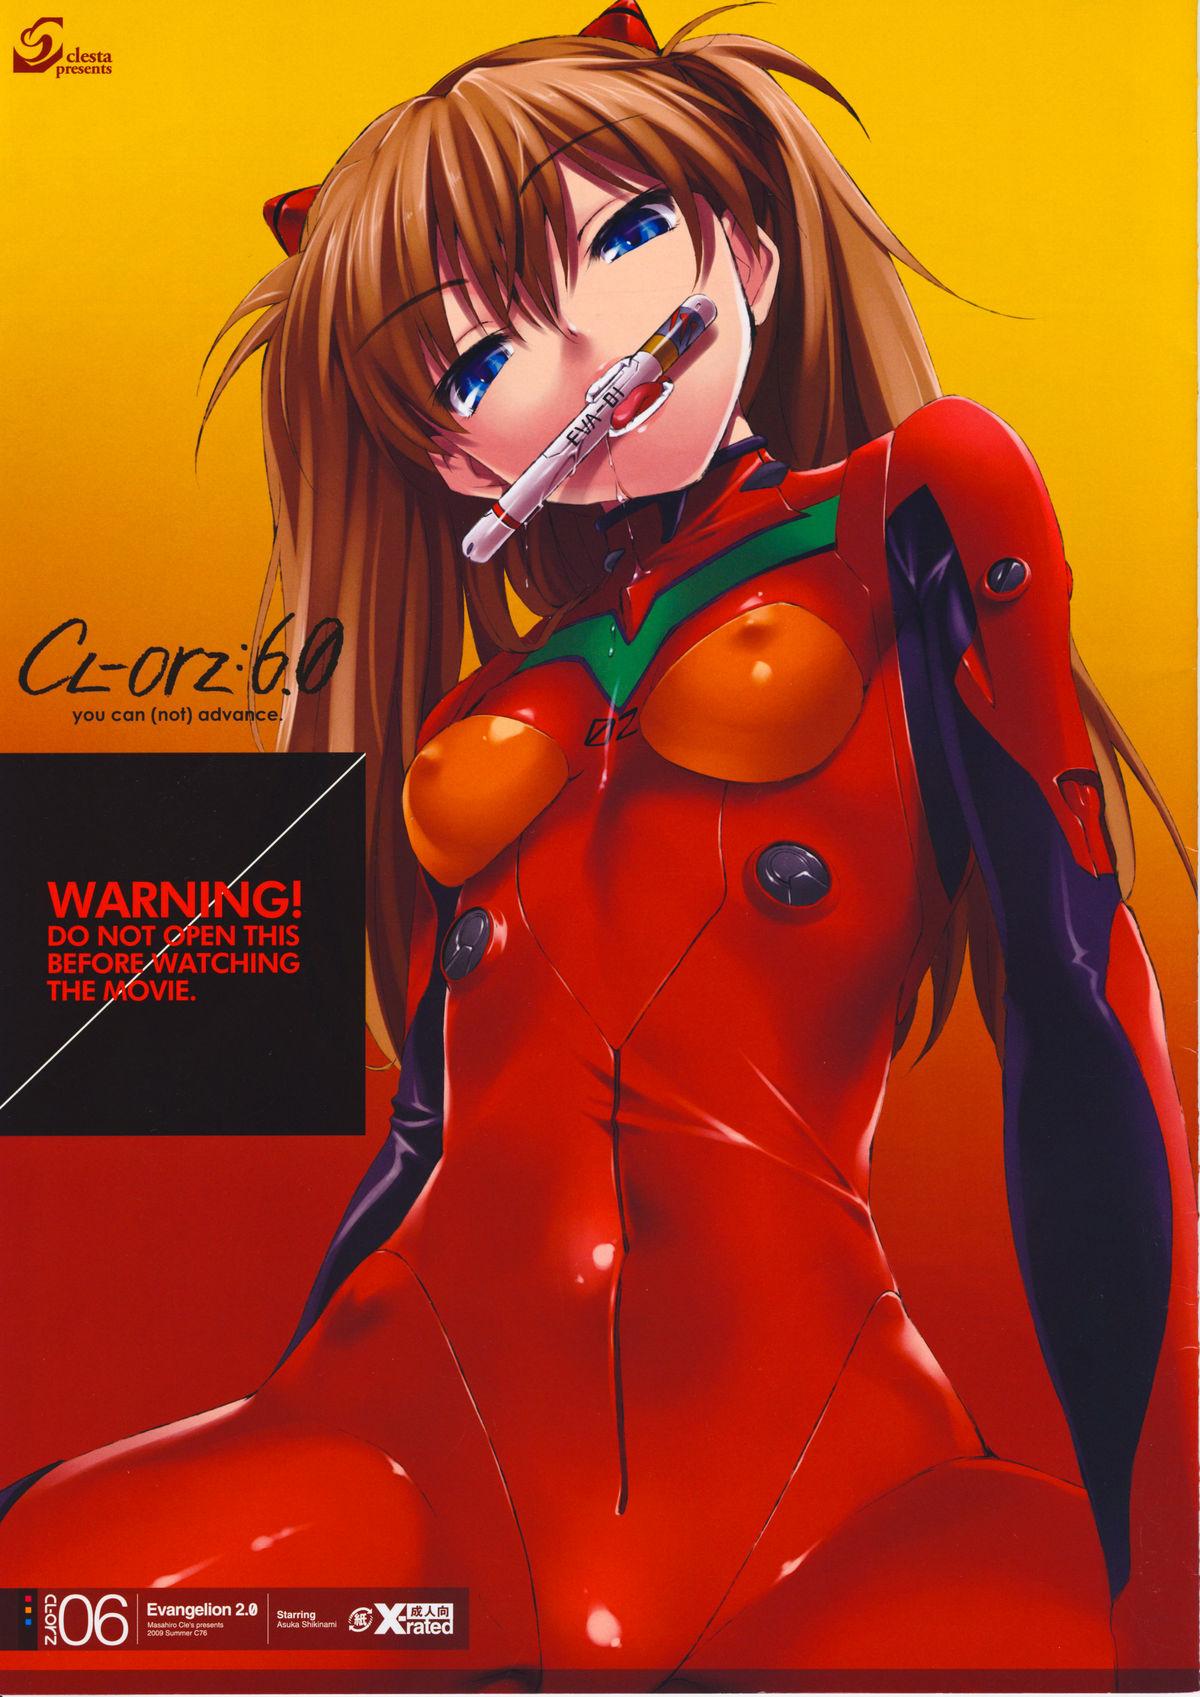 Teen (C76) [Clesta (Cle Masahiro)] CL-orz 6.0 you can (not) advance. (Rebuild of Evangelion) [English] [RedComet] [Decensored] - Neon genesis evangelion Free Blowjob - Page 1